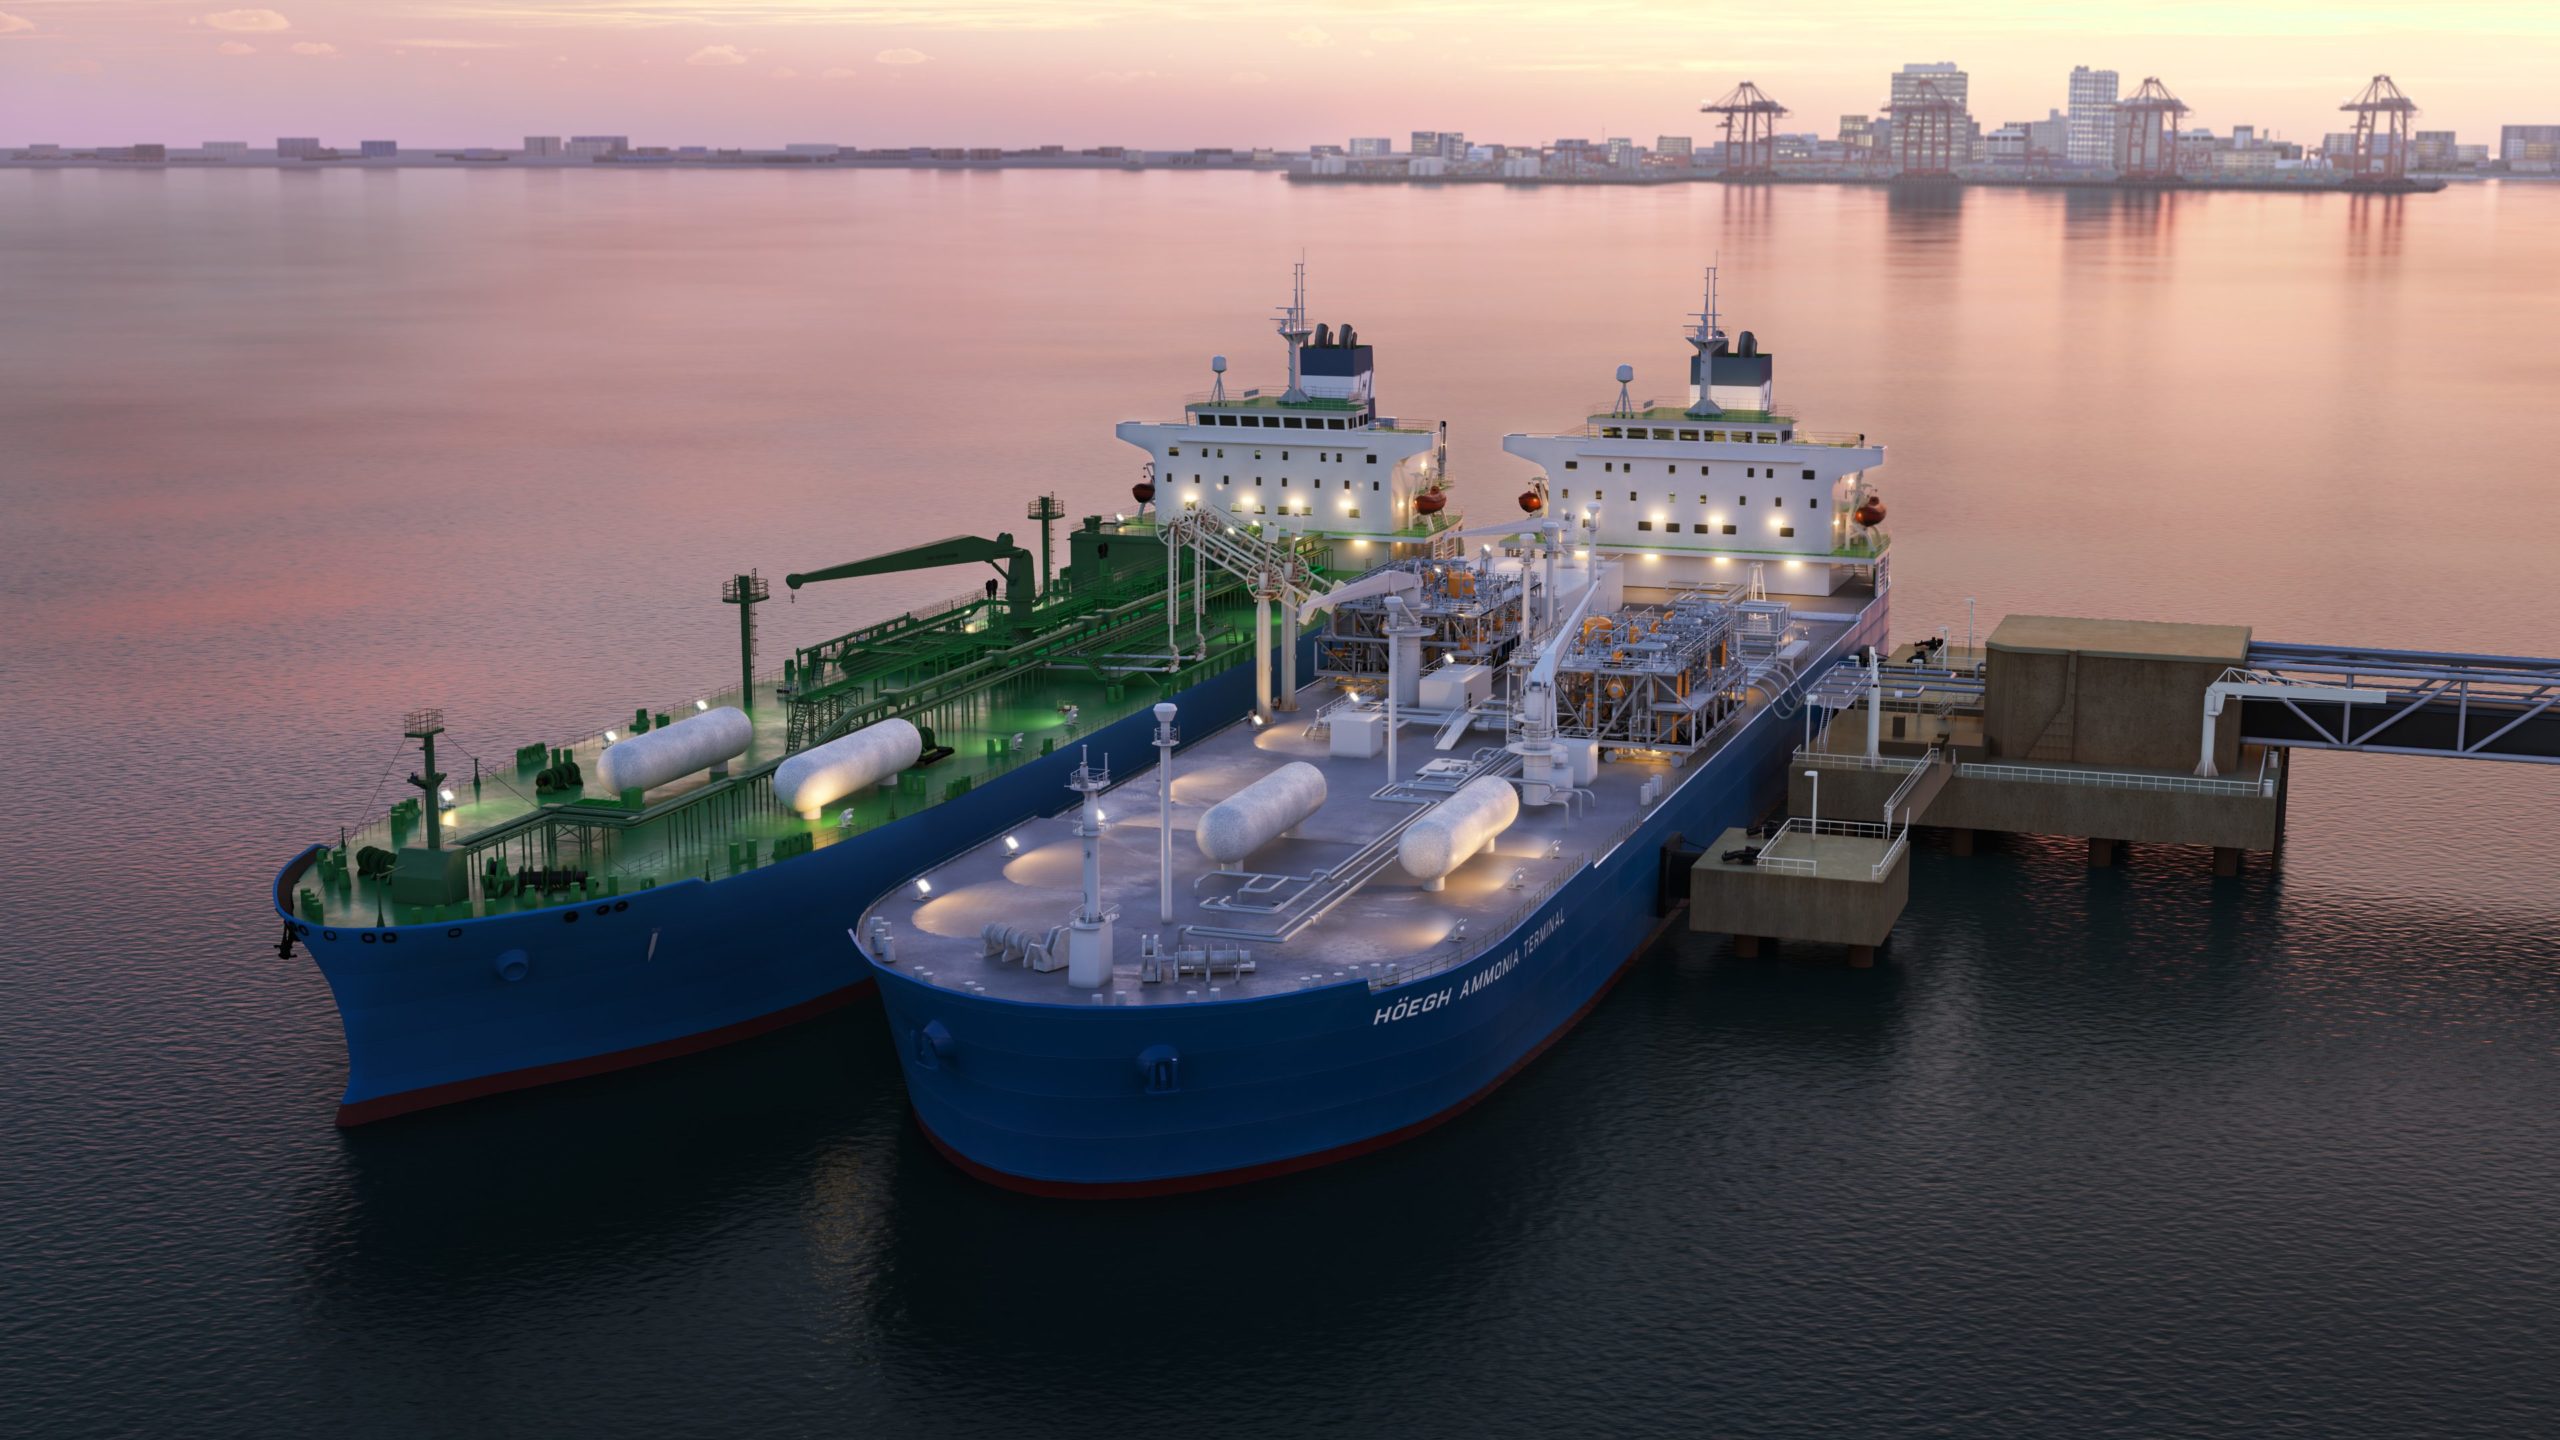 Höegh LNG Banks Norwegian Funding to Convert Ammonia to Hydrogen for a Floating Terminal